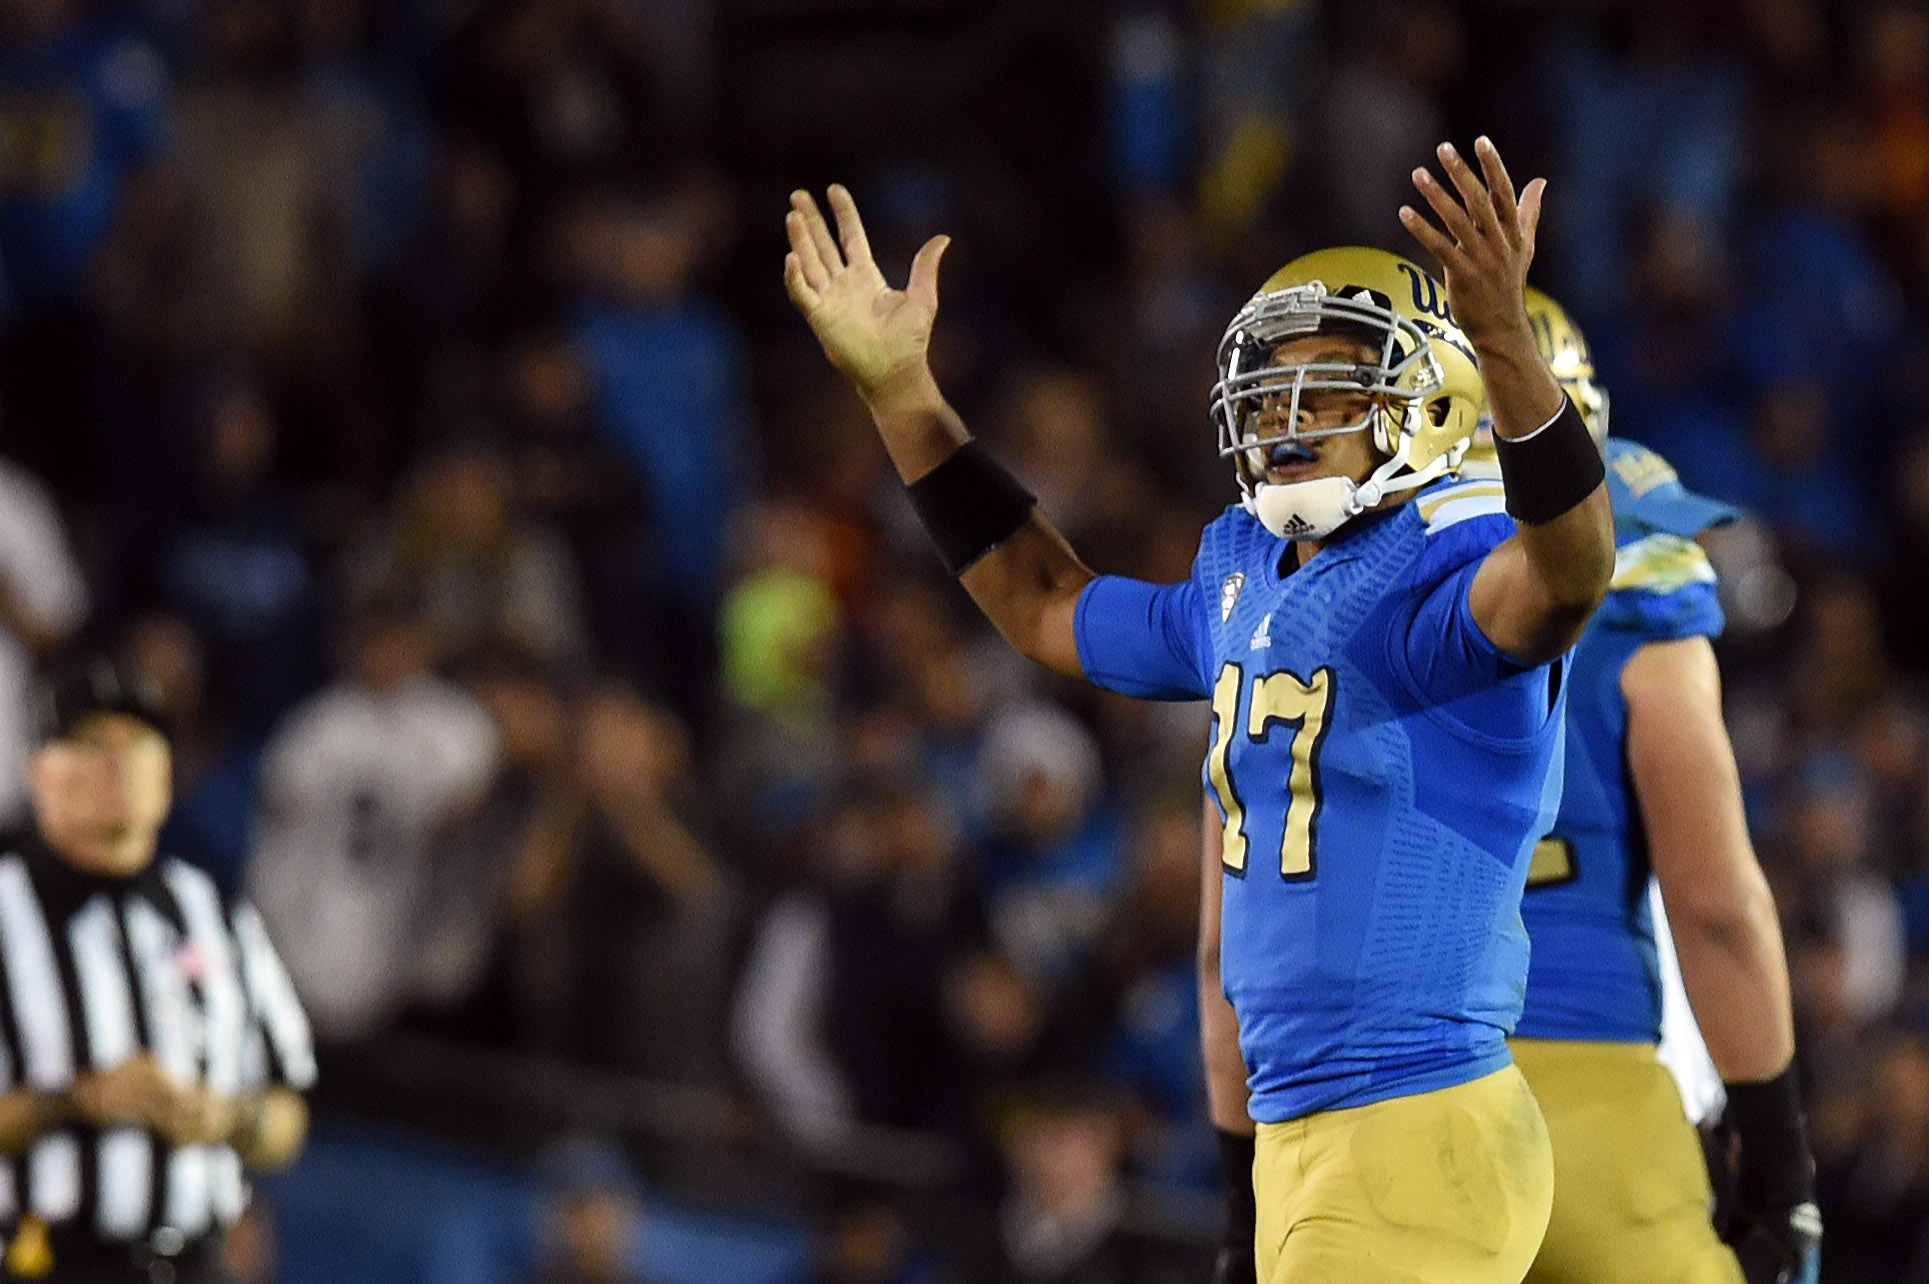 Brett Hundley fell to the fifth round of the 2015 NFL draft. The UCLA quarterback is pictured here during the Bruins' 38-20 win over USC on Nov. 22, 2014 at the Rose Bowl. (Hans Gutknecht/Staff)